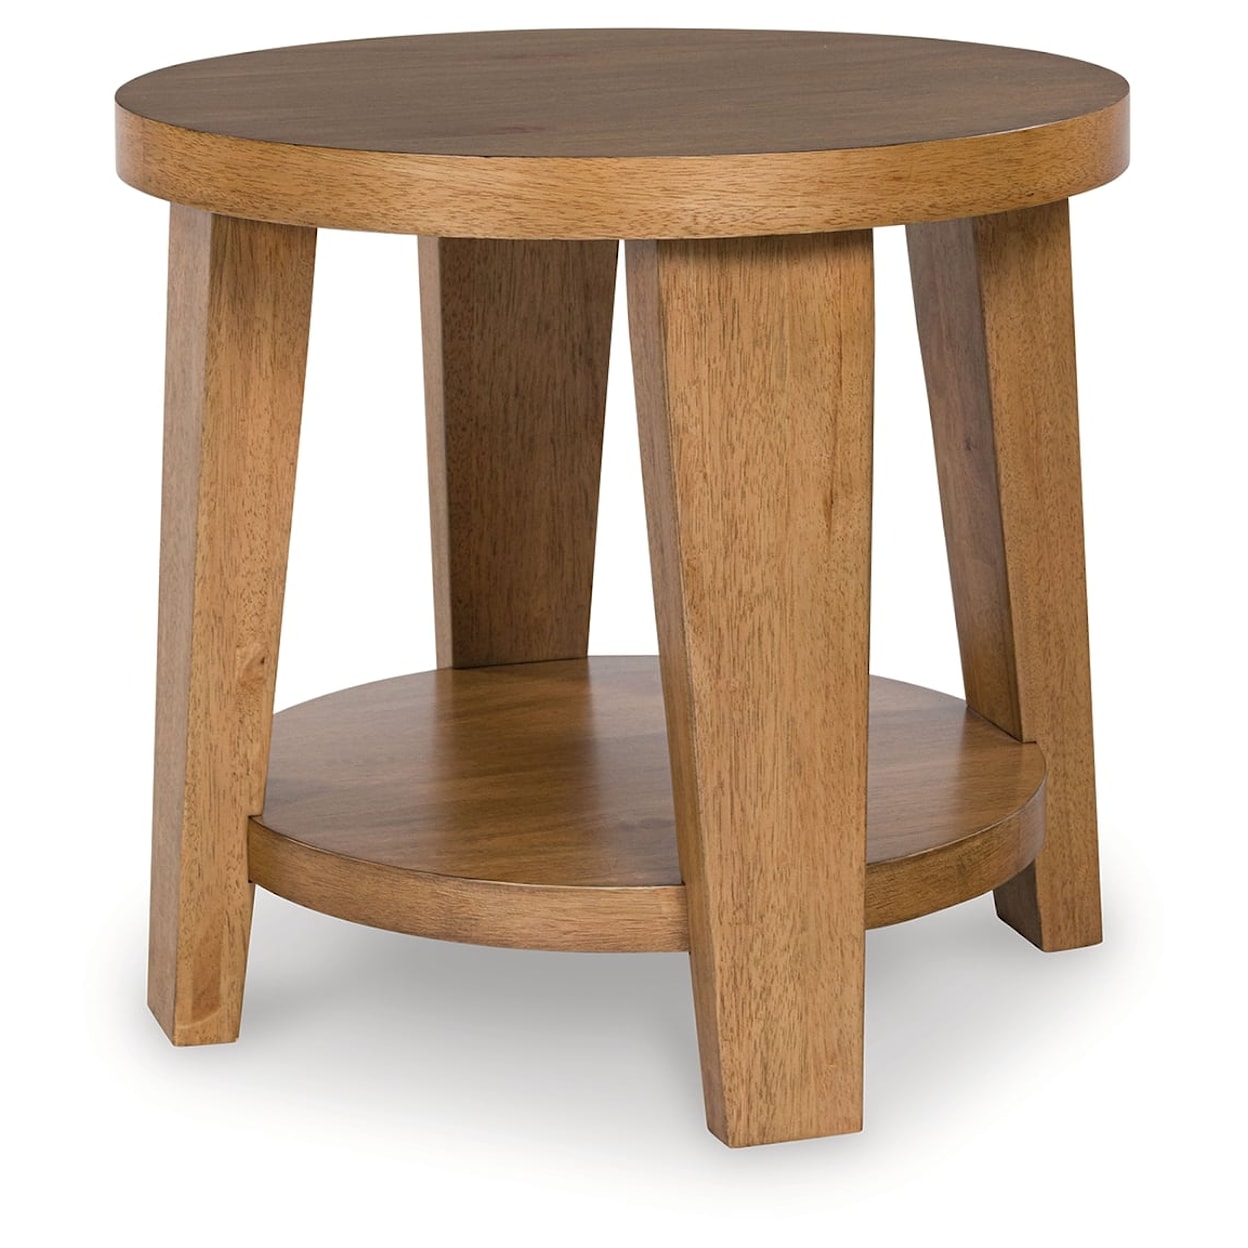 Signature Design by Ashley Kristiland Round End Table